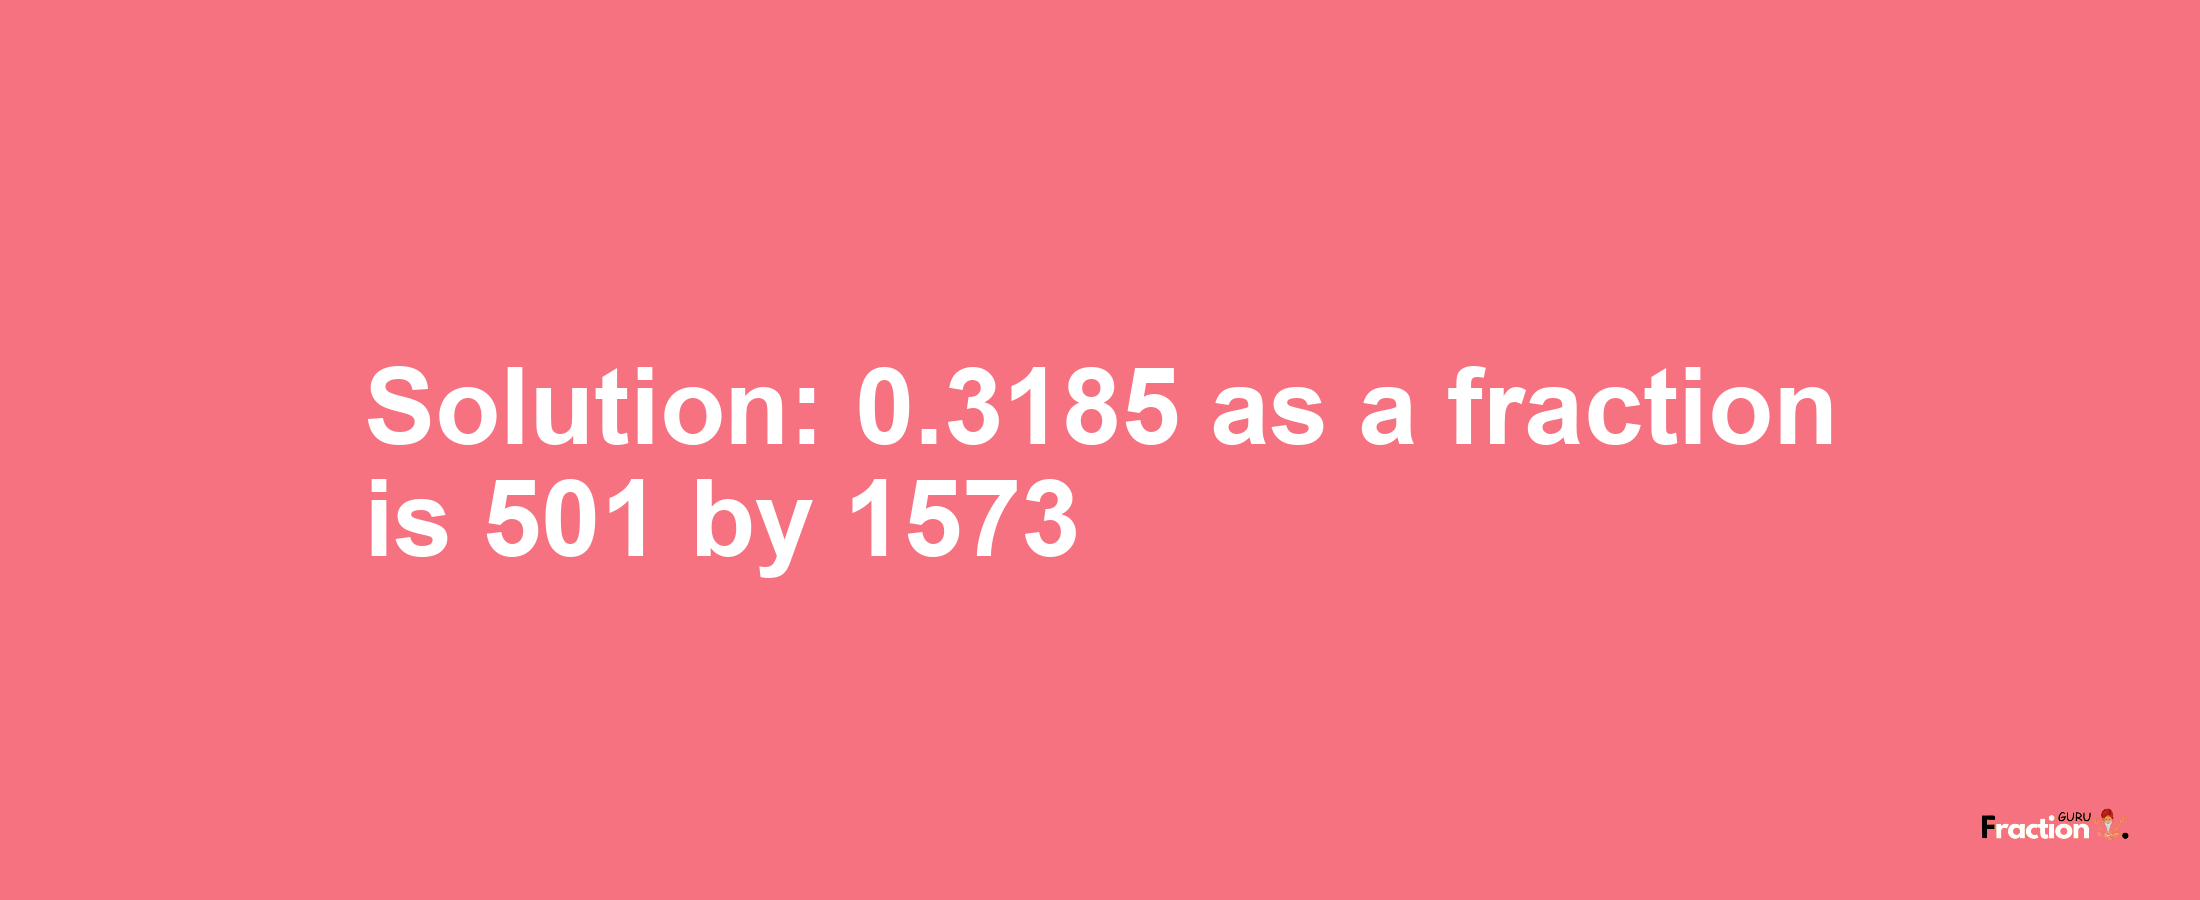 Solution:0.3185 as a fraction is 501/1573